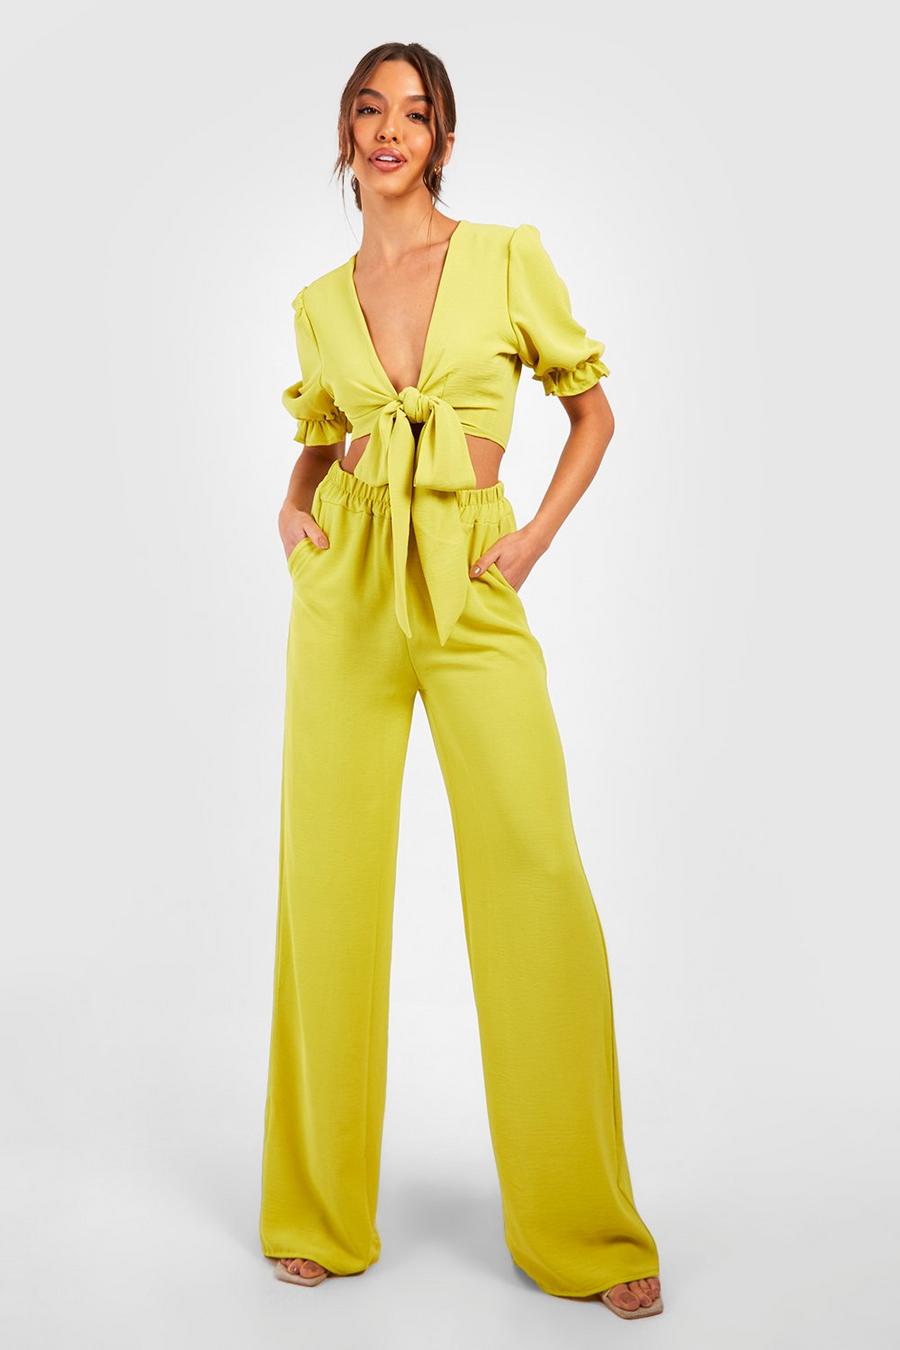 Women's Two Piece Peplum Top and Close-Fitting Pants Set - Yellow